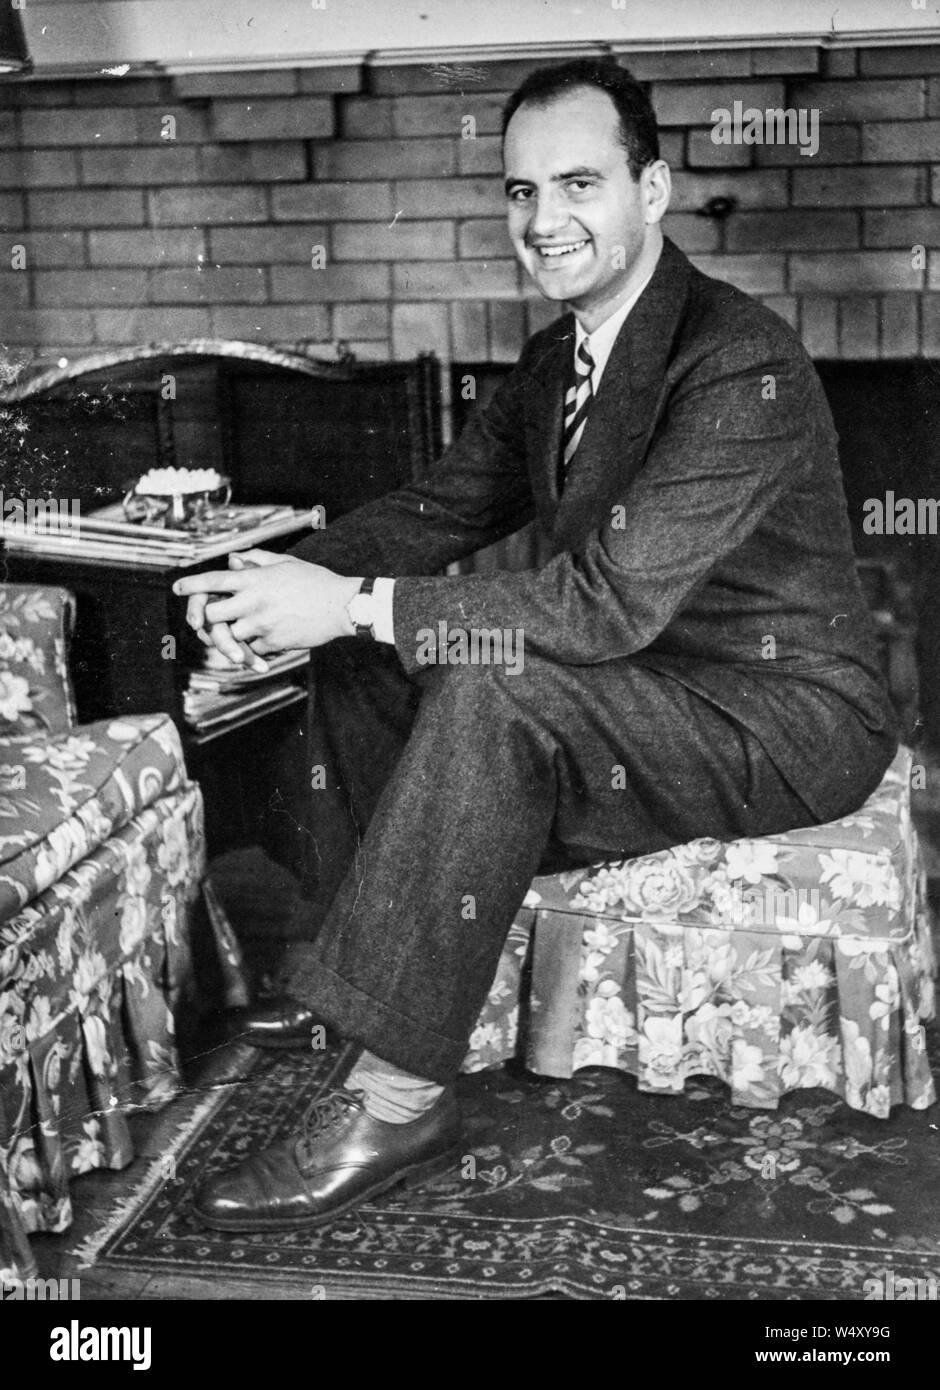 Full length portrait of a smiling man wearing a dark suit, leather shoes, a necktie, and a wristwatch, profile view with hands clasped, sitting on a floral print ottoman in front of a fireplace in a living room, Detroit, Michigan, 1960. () Stock Photo